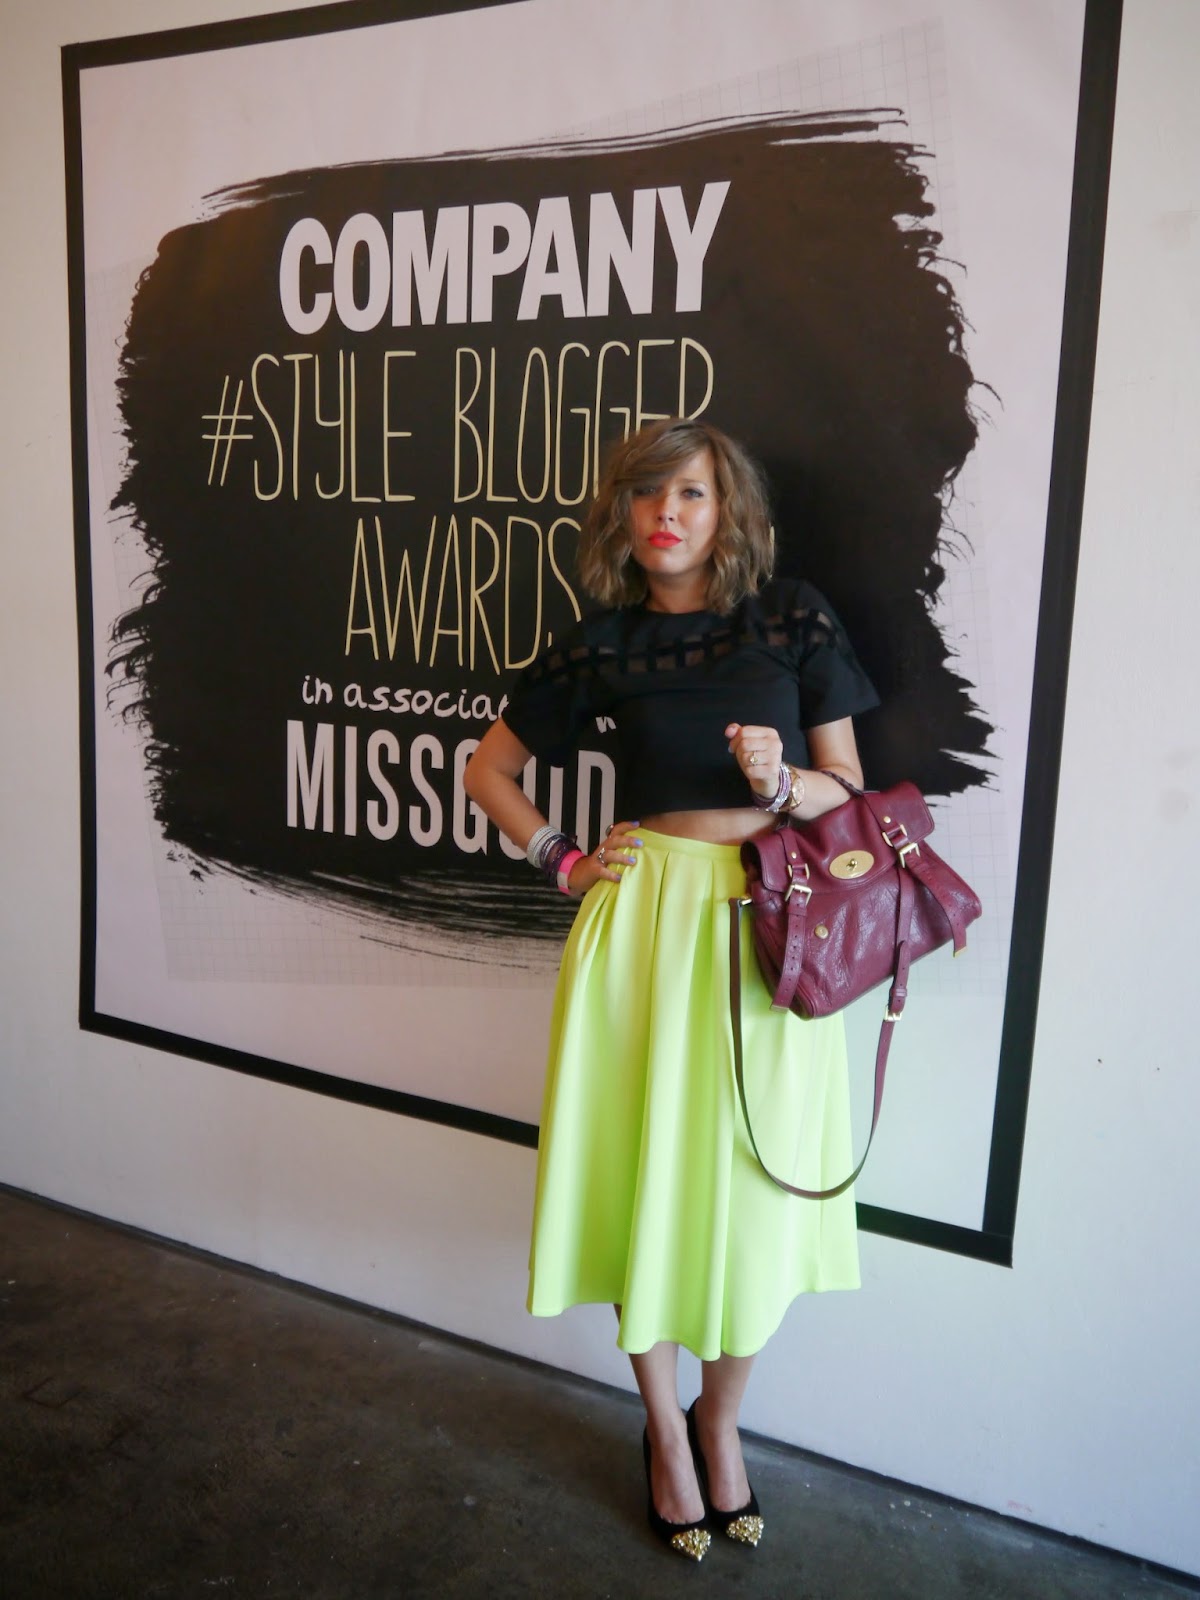 Neon Lime Skirt and Crop top by Missquided #Companybloggerawards2014